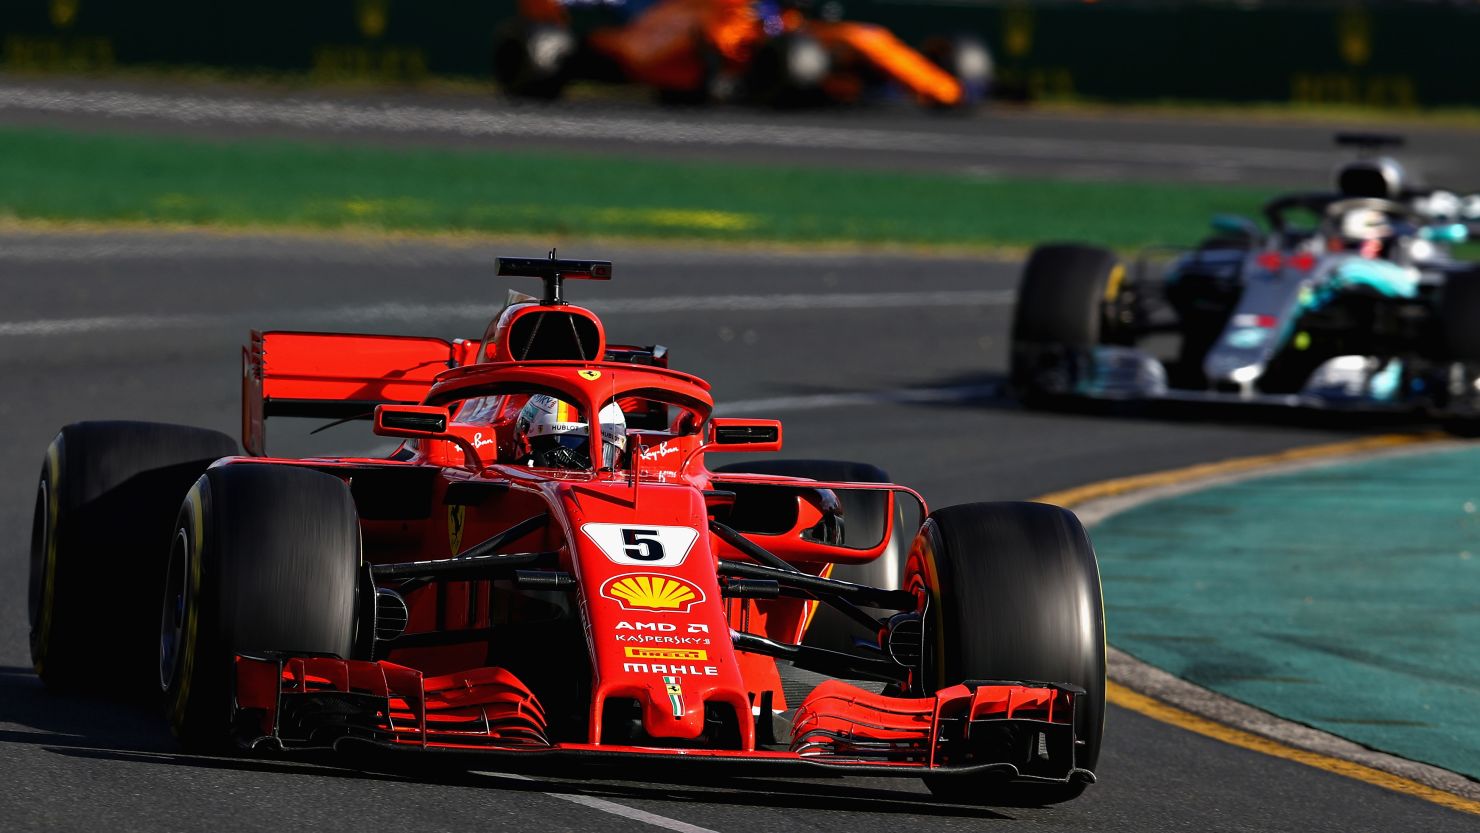 Sebastian Vettel of Germany leads Lewis Hamilton on his way to victory in the 2018 Australian Grand Prix in Melbourne.